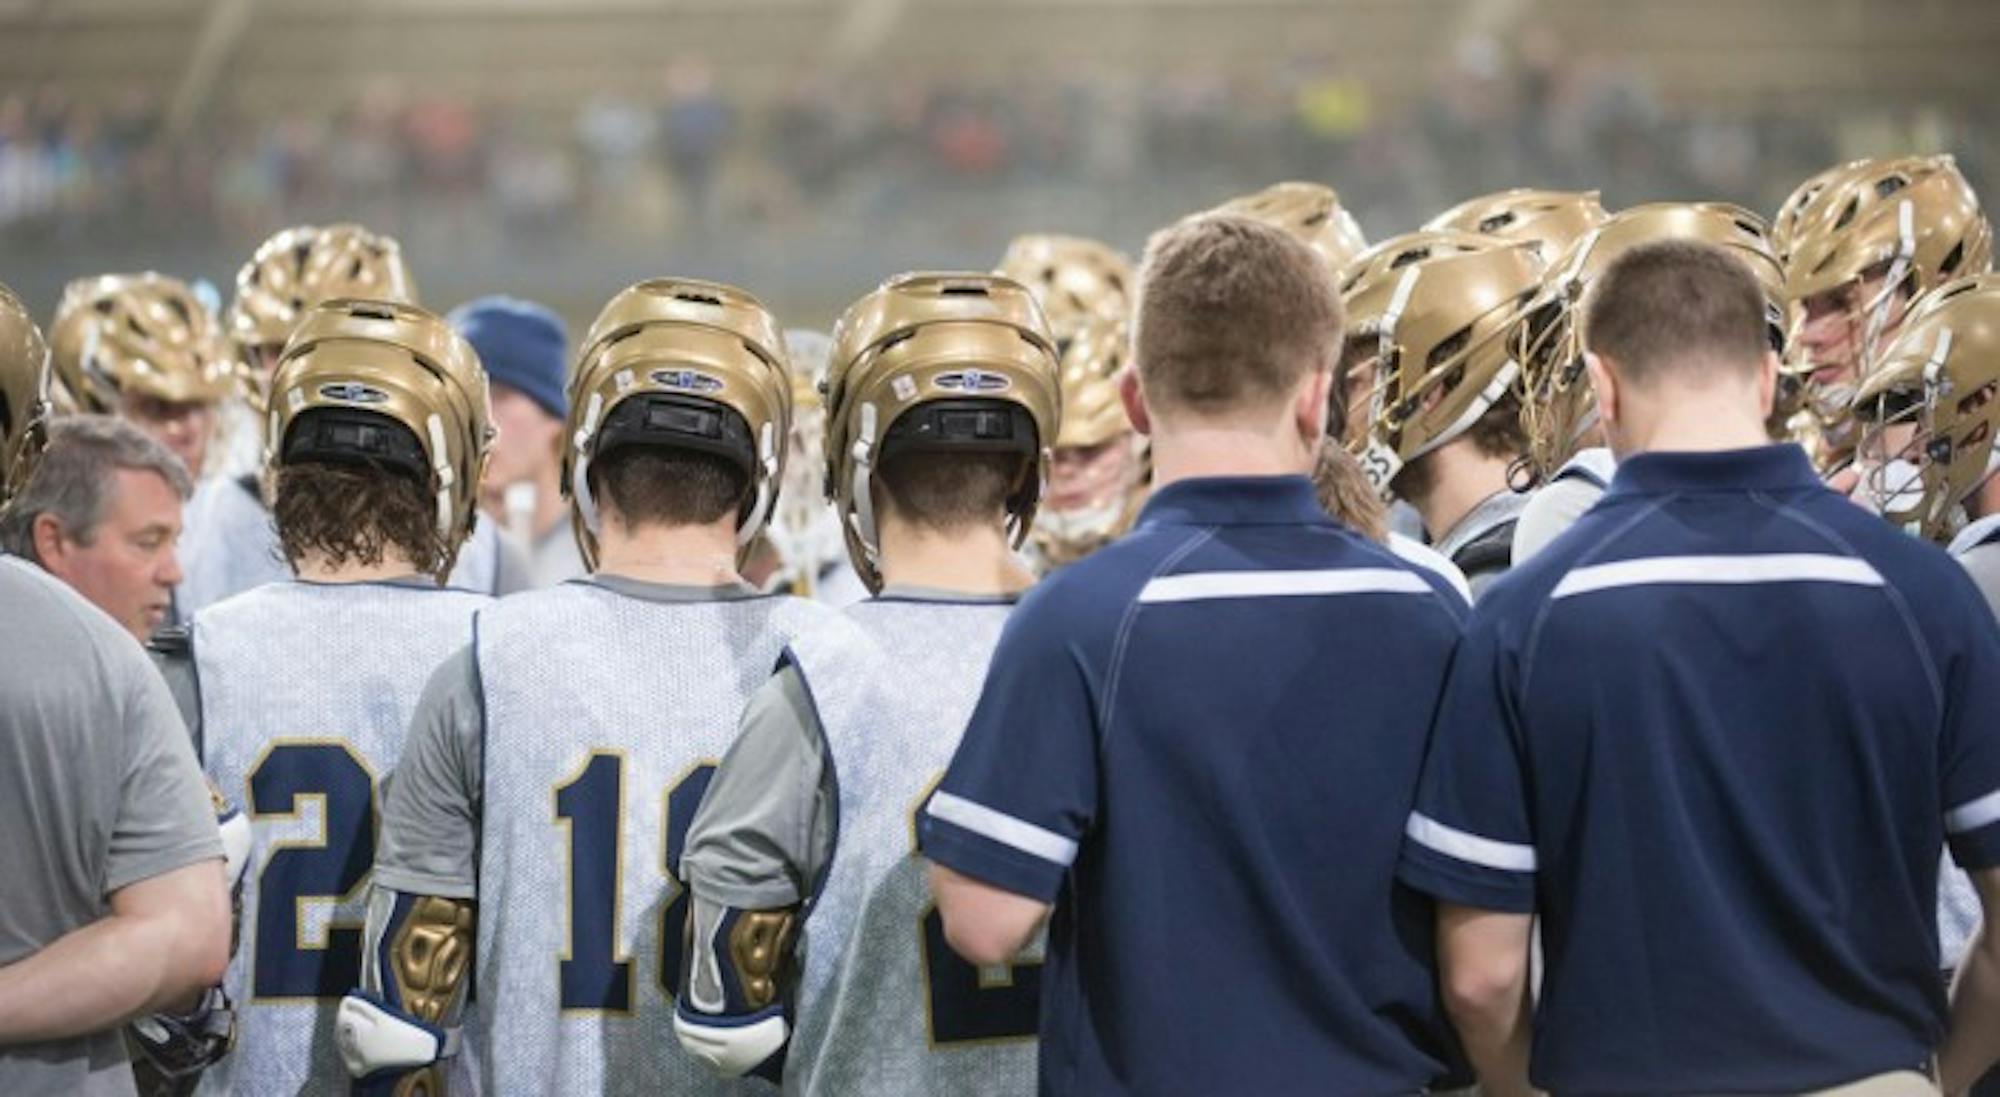 Notre Dame men's lacrosse team is this year's recipient of the 'Gamechanger' award for their service at the Dickinson Fine Arts Academy. The honoree is chosen by the ACC in partnership with United Way.